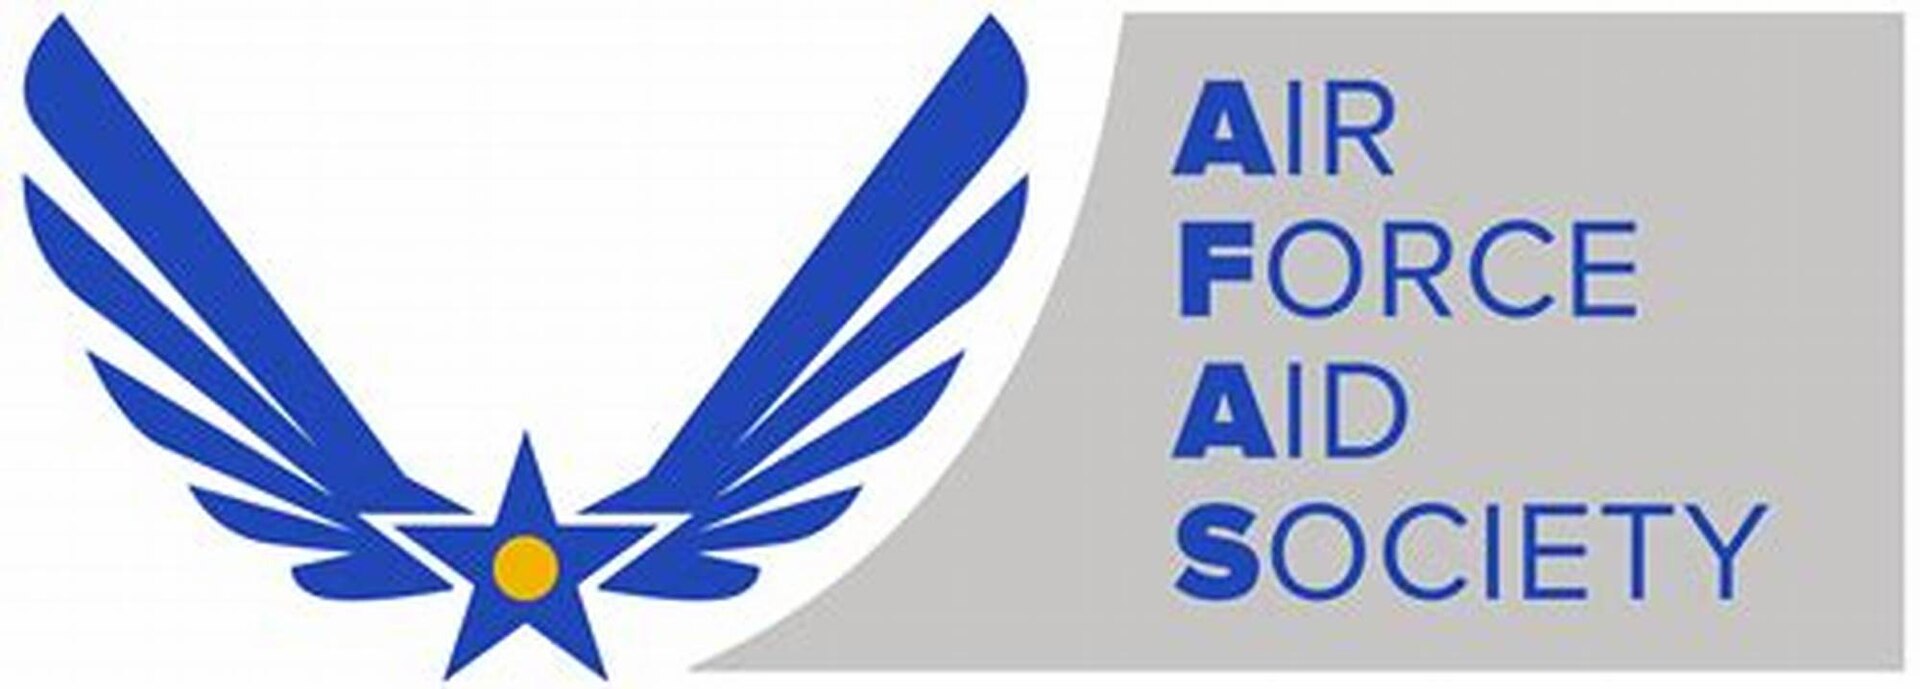 The Air Force Aid Society has provided more than $6 million in hurricane disaster and relief assistance to airmen and their families across the Florida Gulf region following the aftermath of Hurricane Michael.